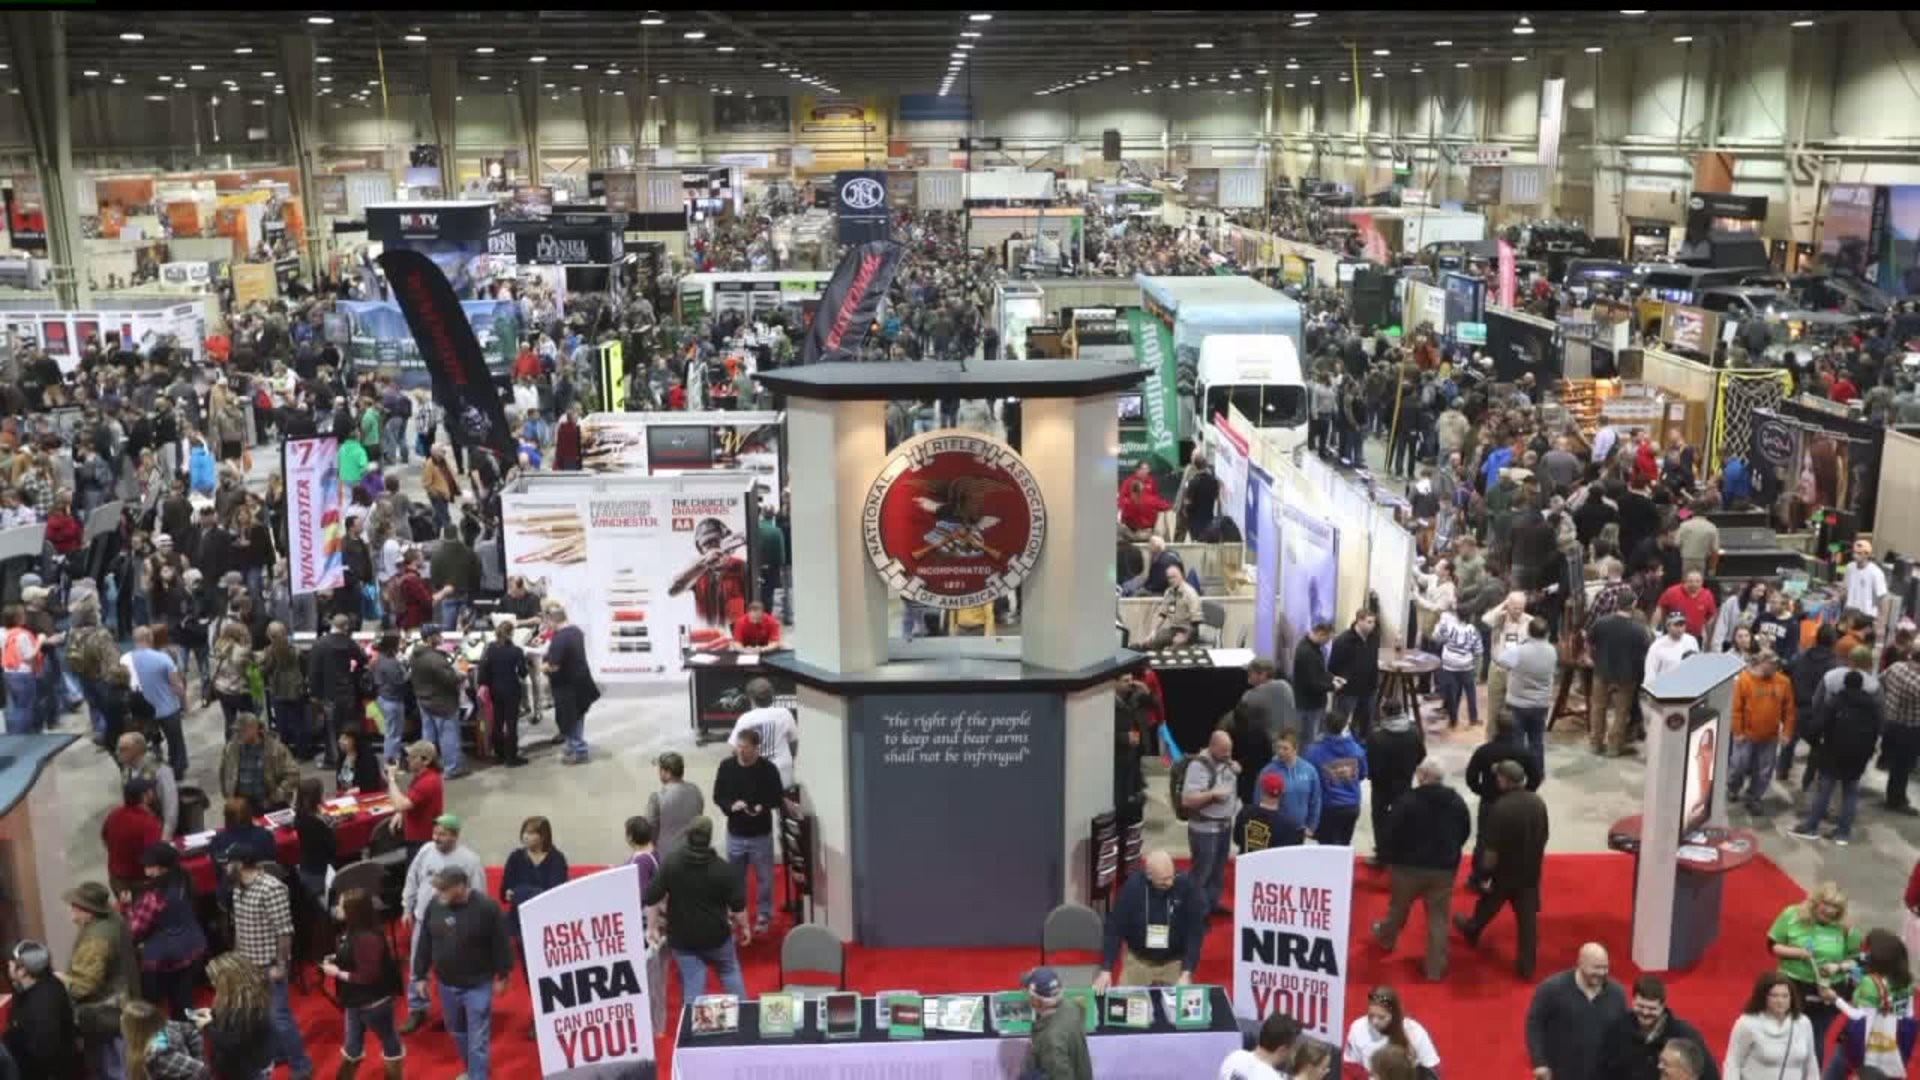 The NRA Great American Outdoor Show is in Harrisburg